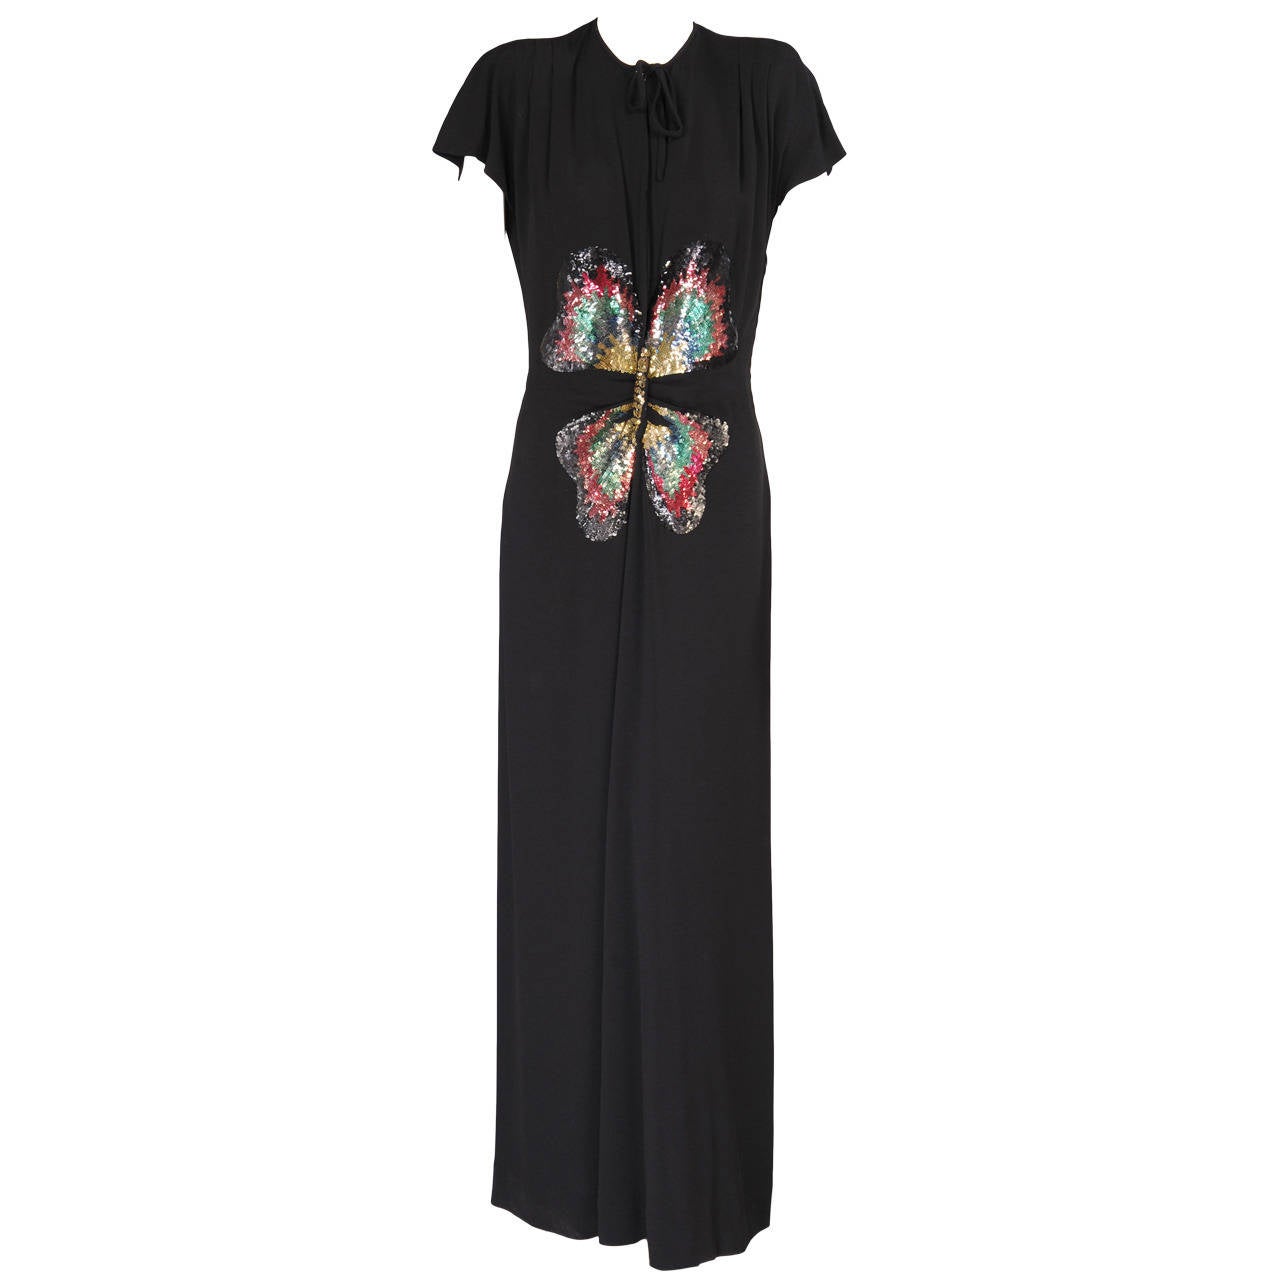 1940's Black Crepe Evening Dress with Beaded Butterfly Motif